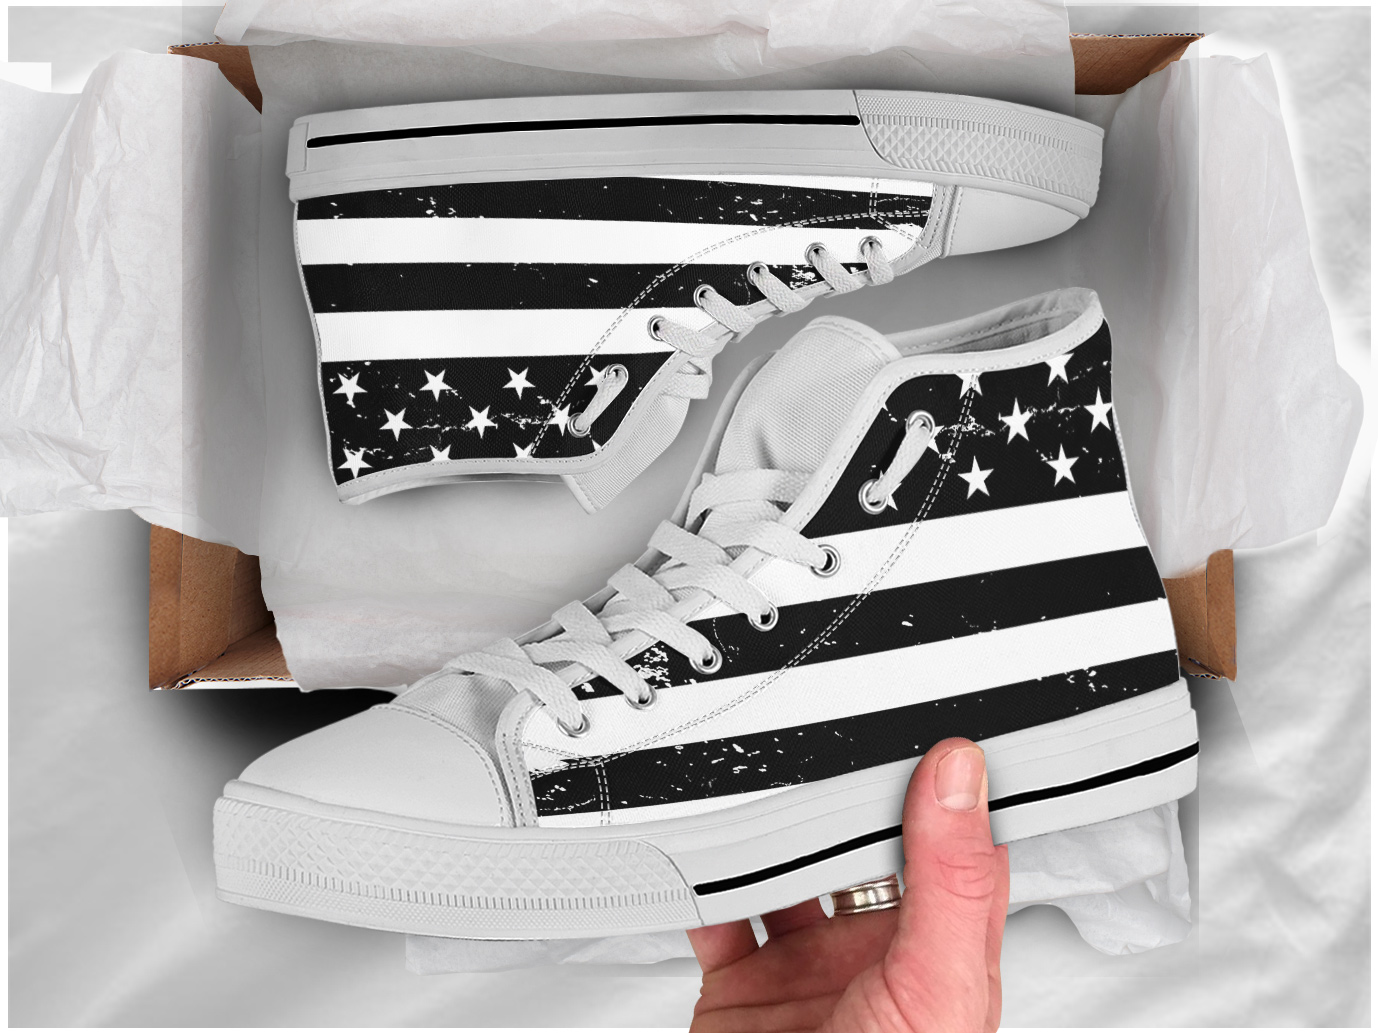 US American Flag Shoes | Custom High Top Sneakers For Kids & Adults